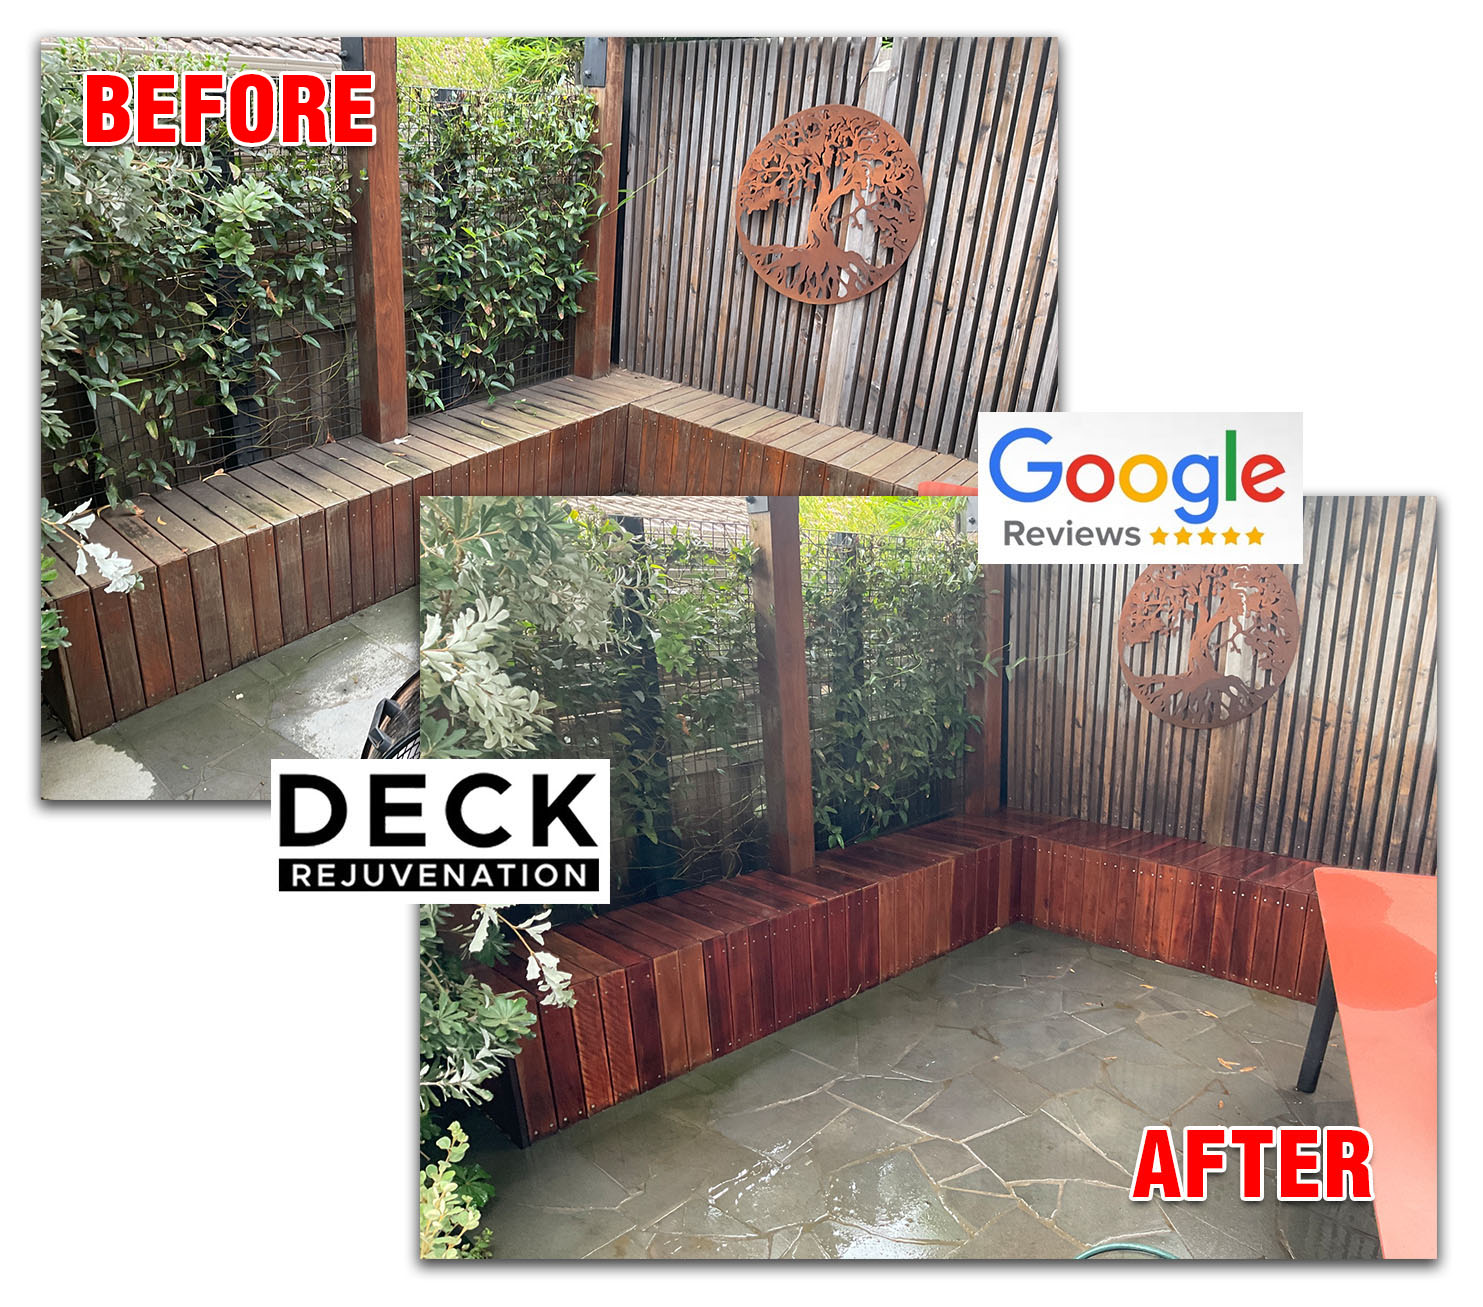 Deck Oiling